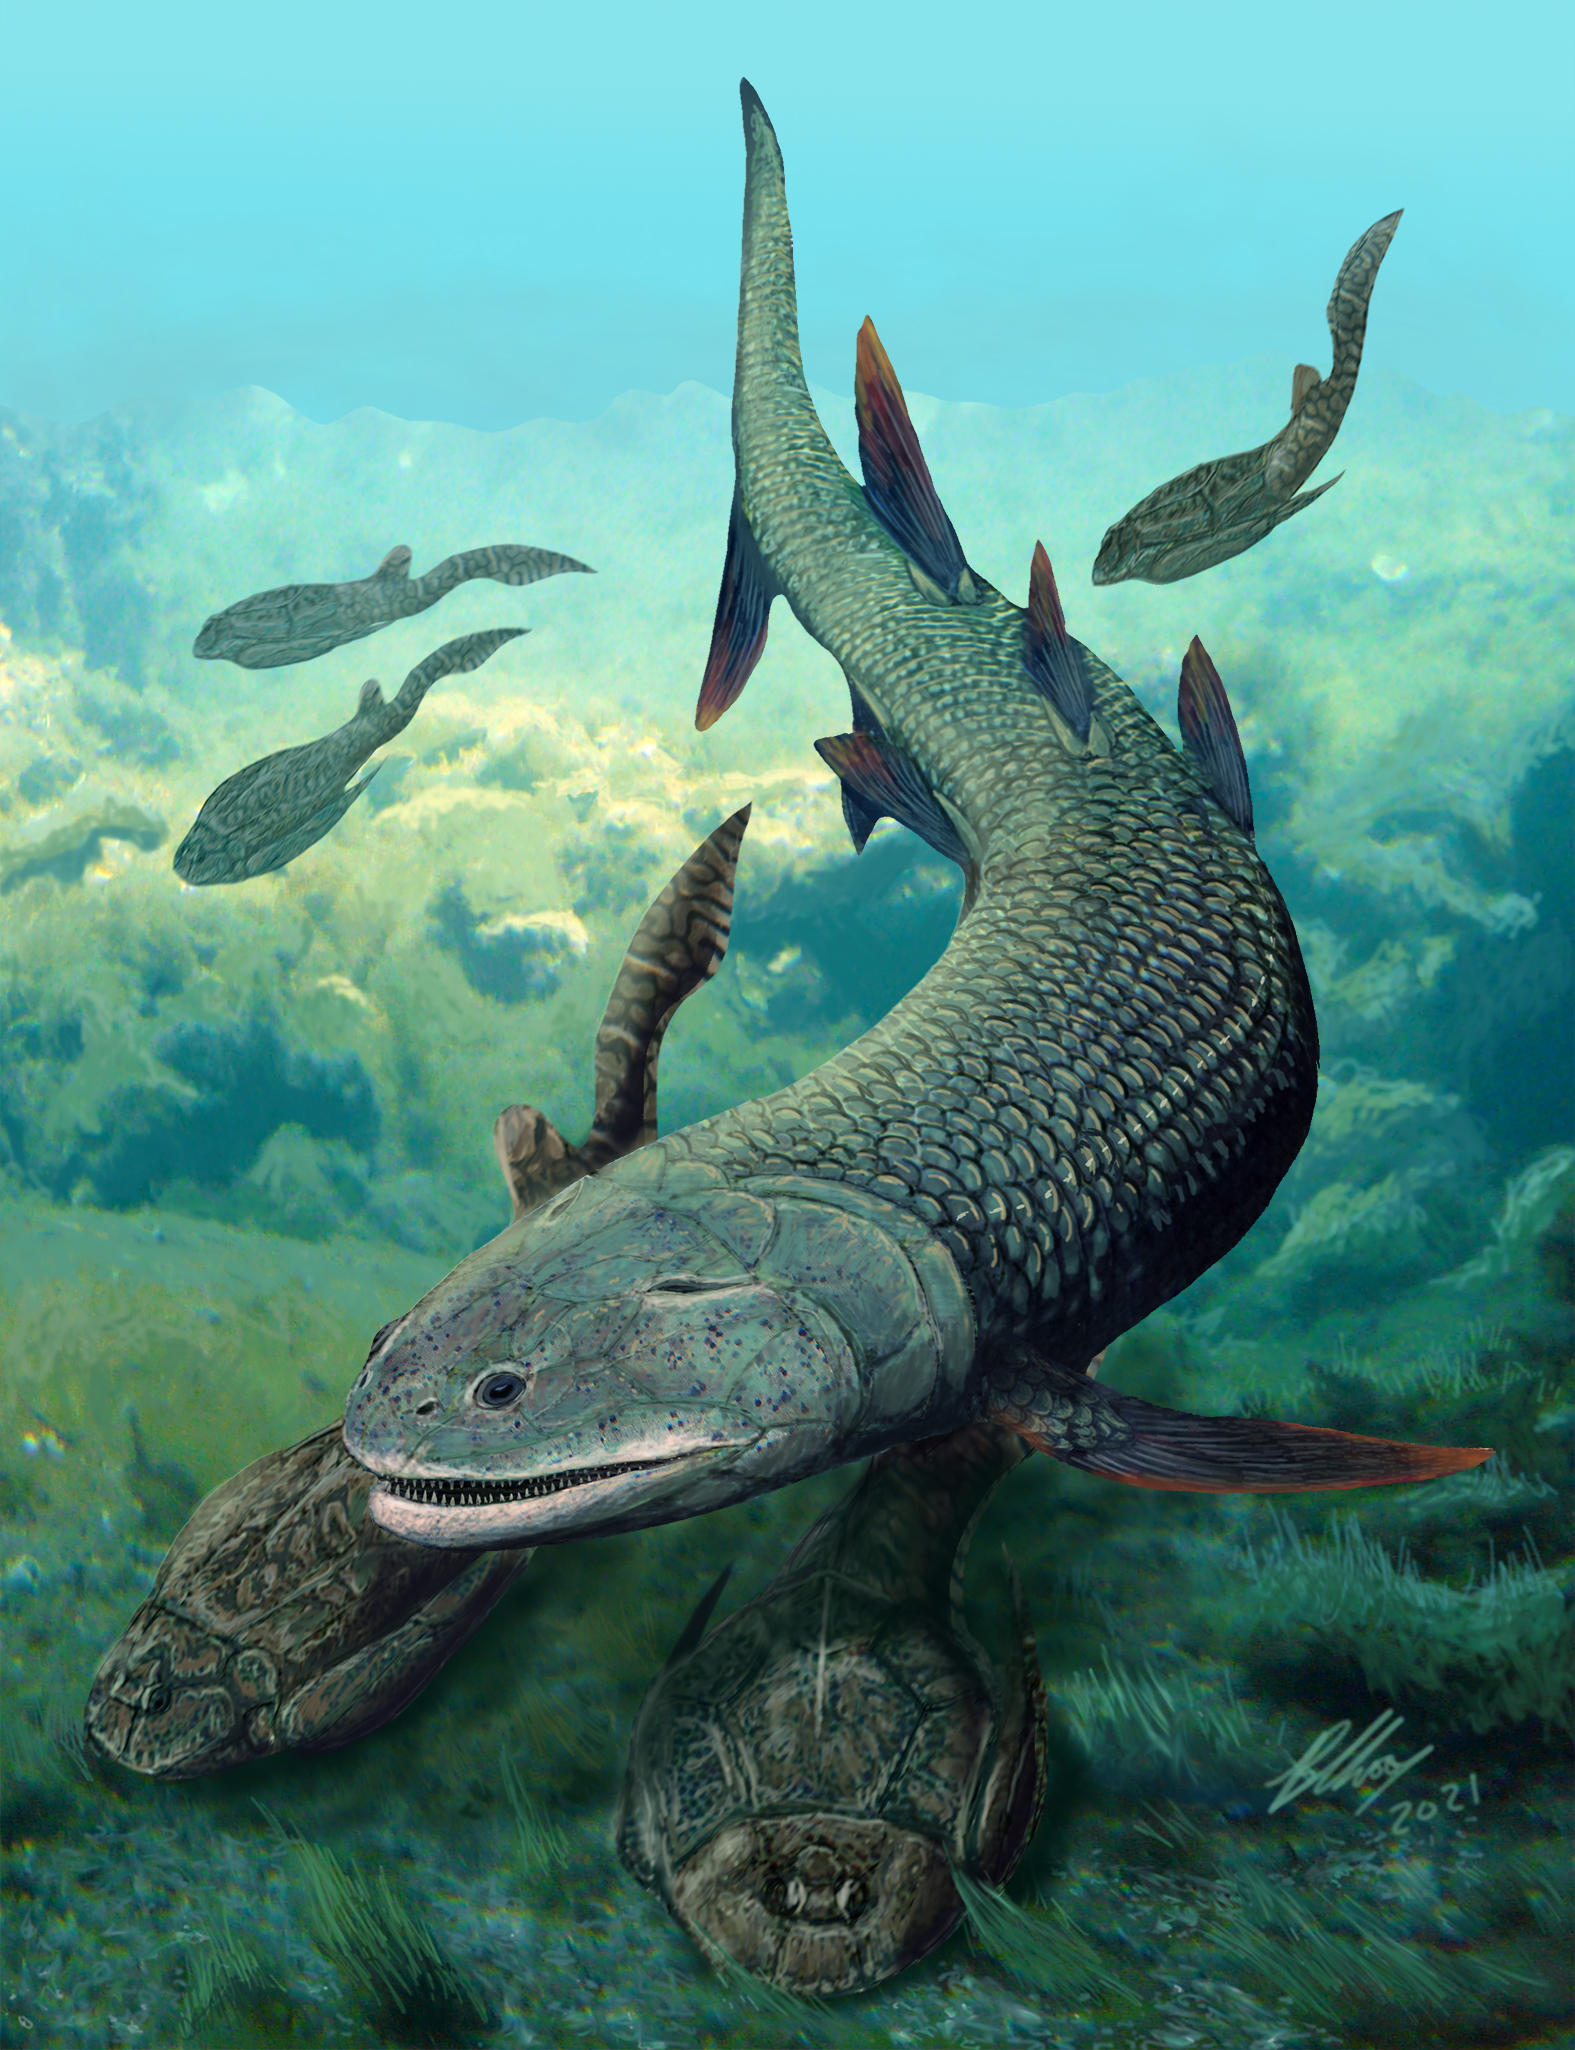 Scientists have discovered a strange ancient fish, 380 million years old, that breathes air